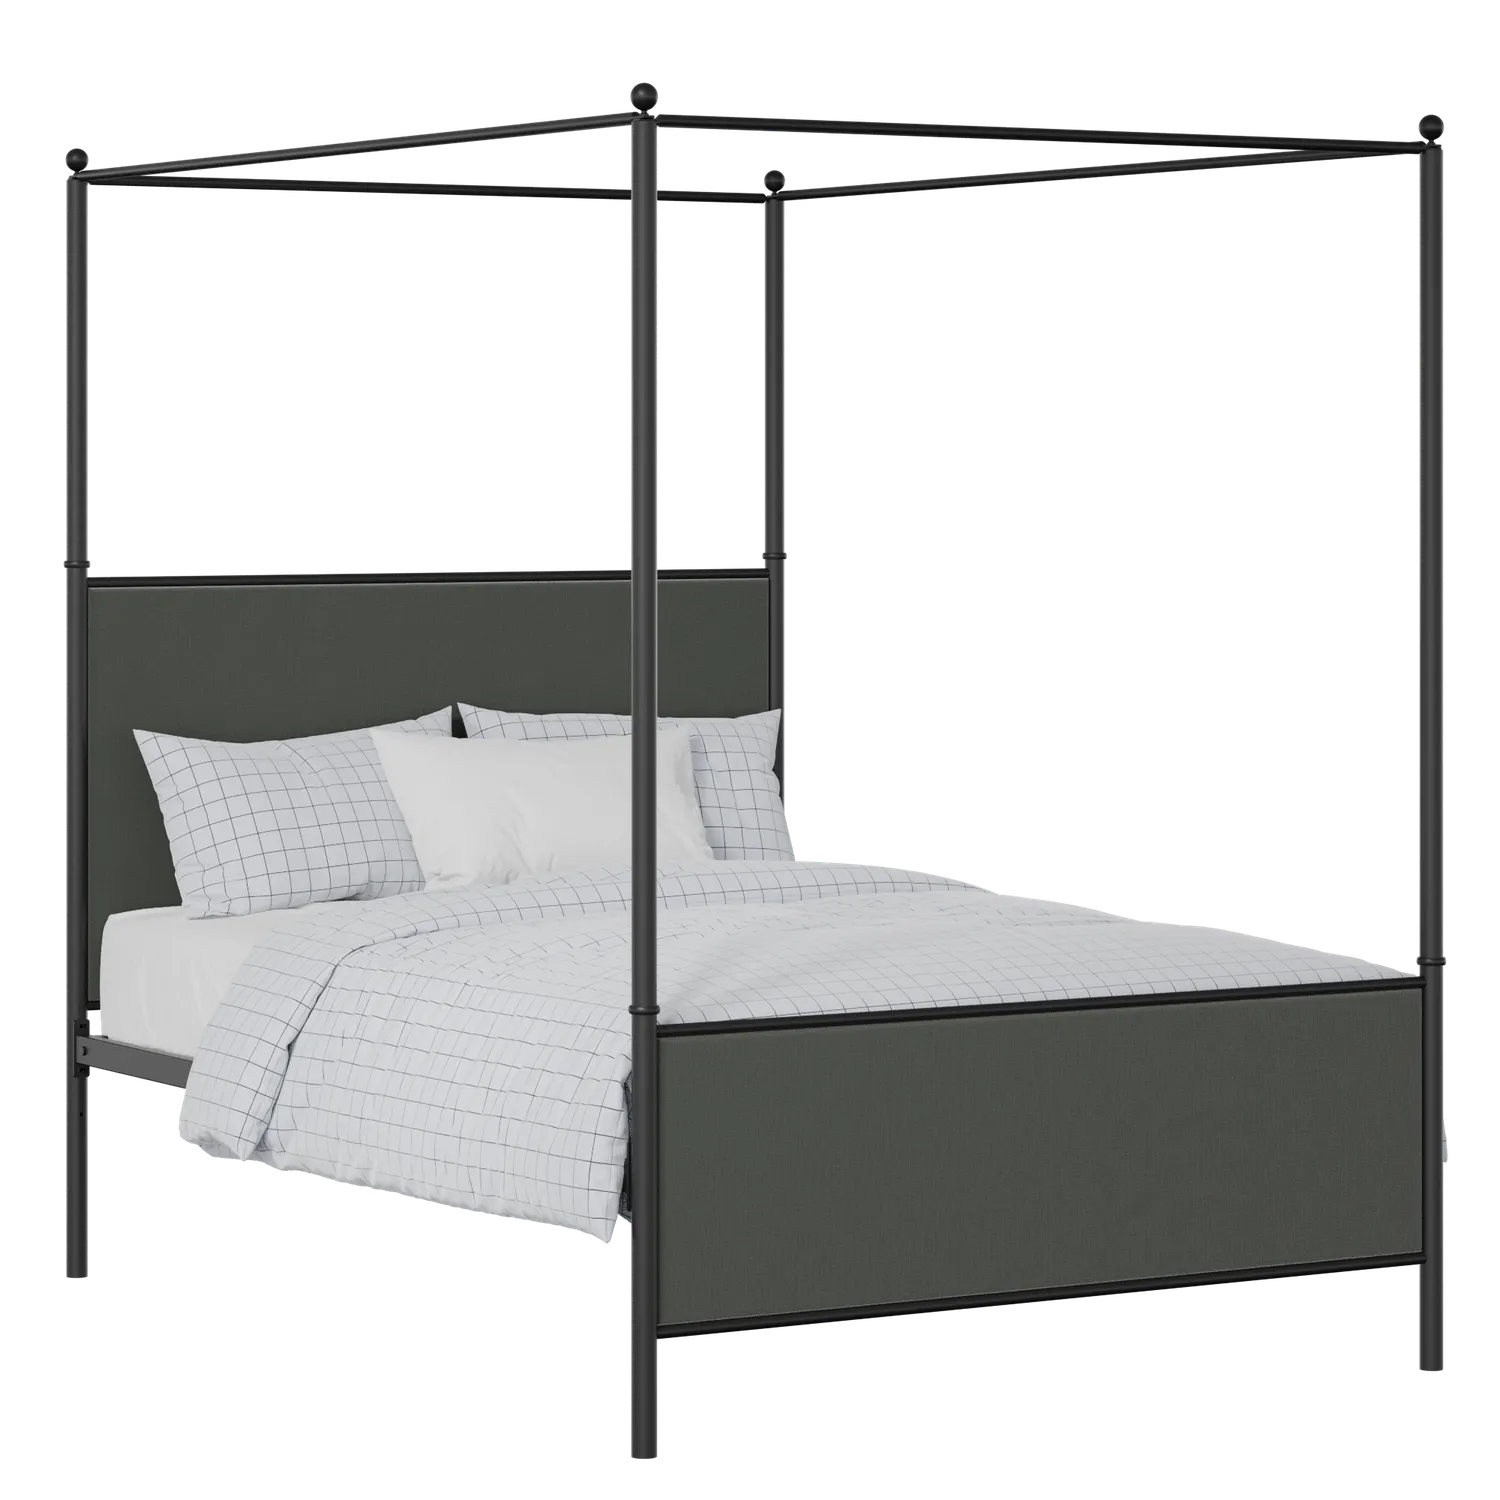 Reims iron/metal upholstered bed in black with iron fabric